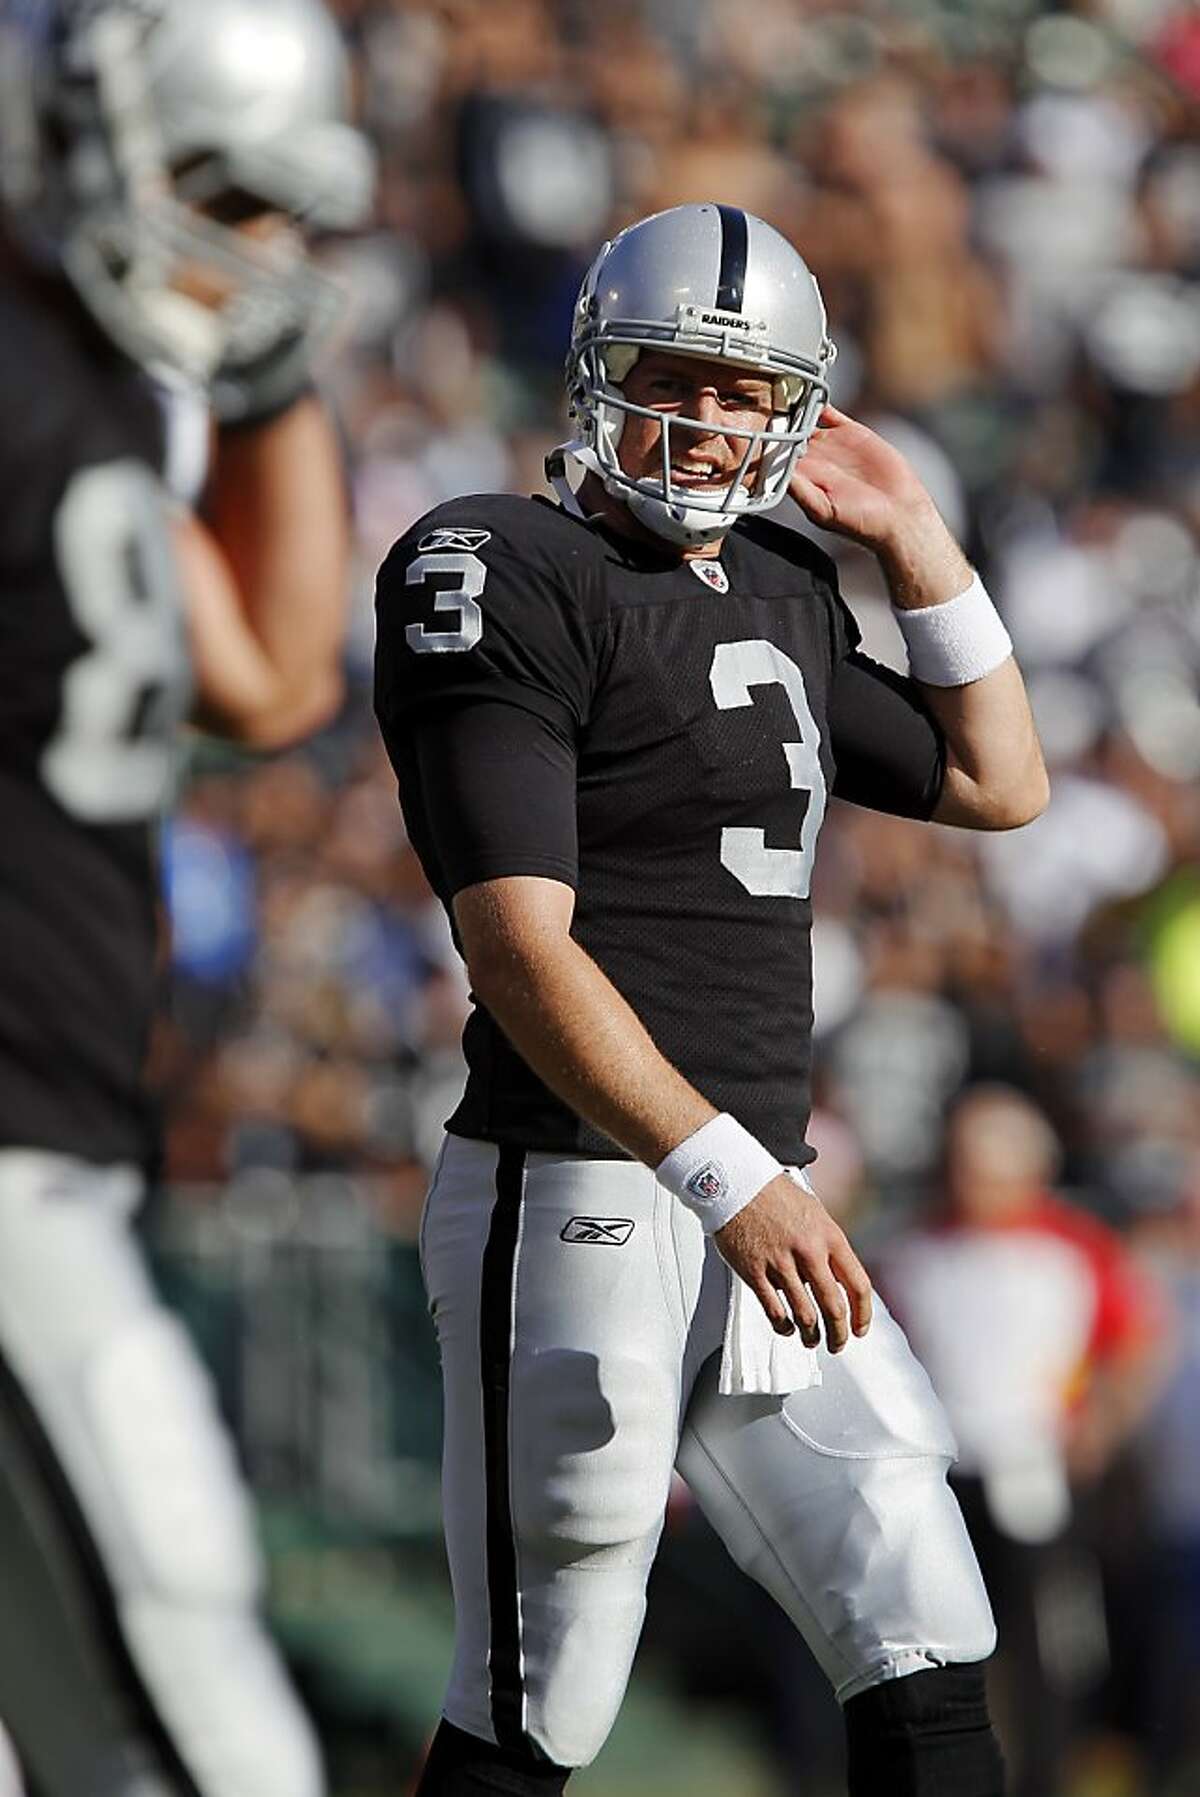 OAKLAND, CA - OCTOBER 23: Quarterback Carson Palmer #3 of the Oakland Raiders reacts as he heads to the sidelines after throwing another interception in the fourth quarter against the Kansas City Chiefs on October 23, 2011 at O.co Coliseum in Oakland, California. The Chiefs won 28-0. (Photo by Brian Bahr/Getty Images)